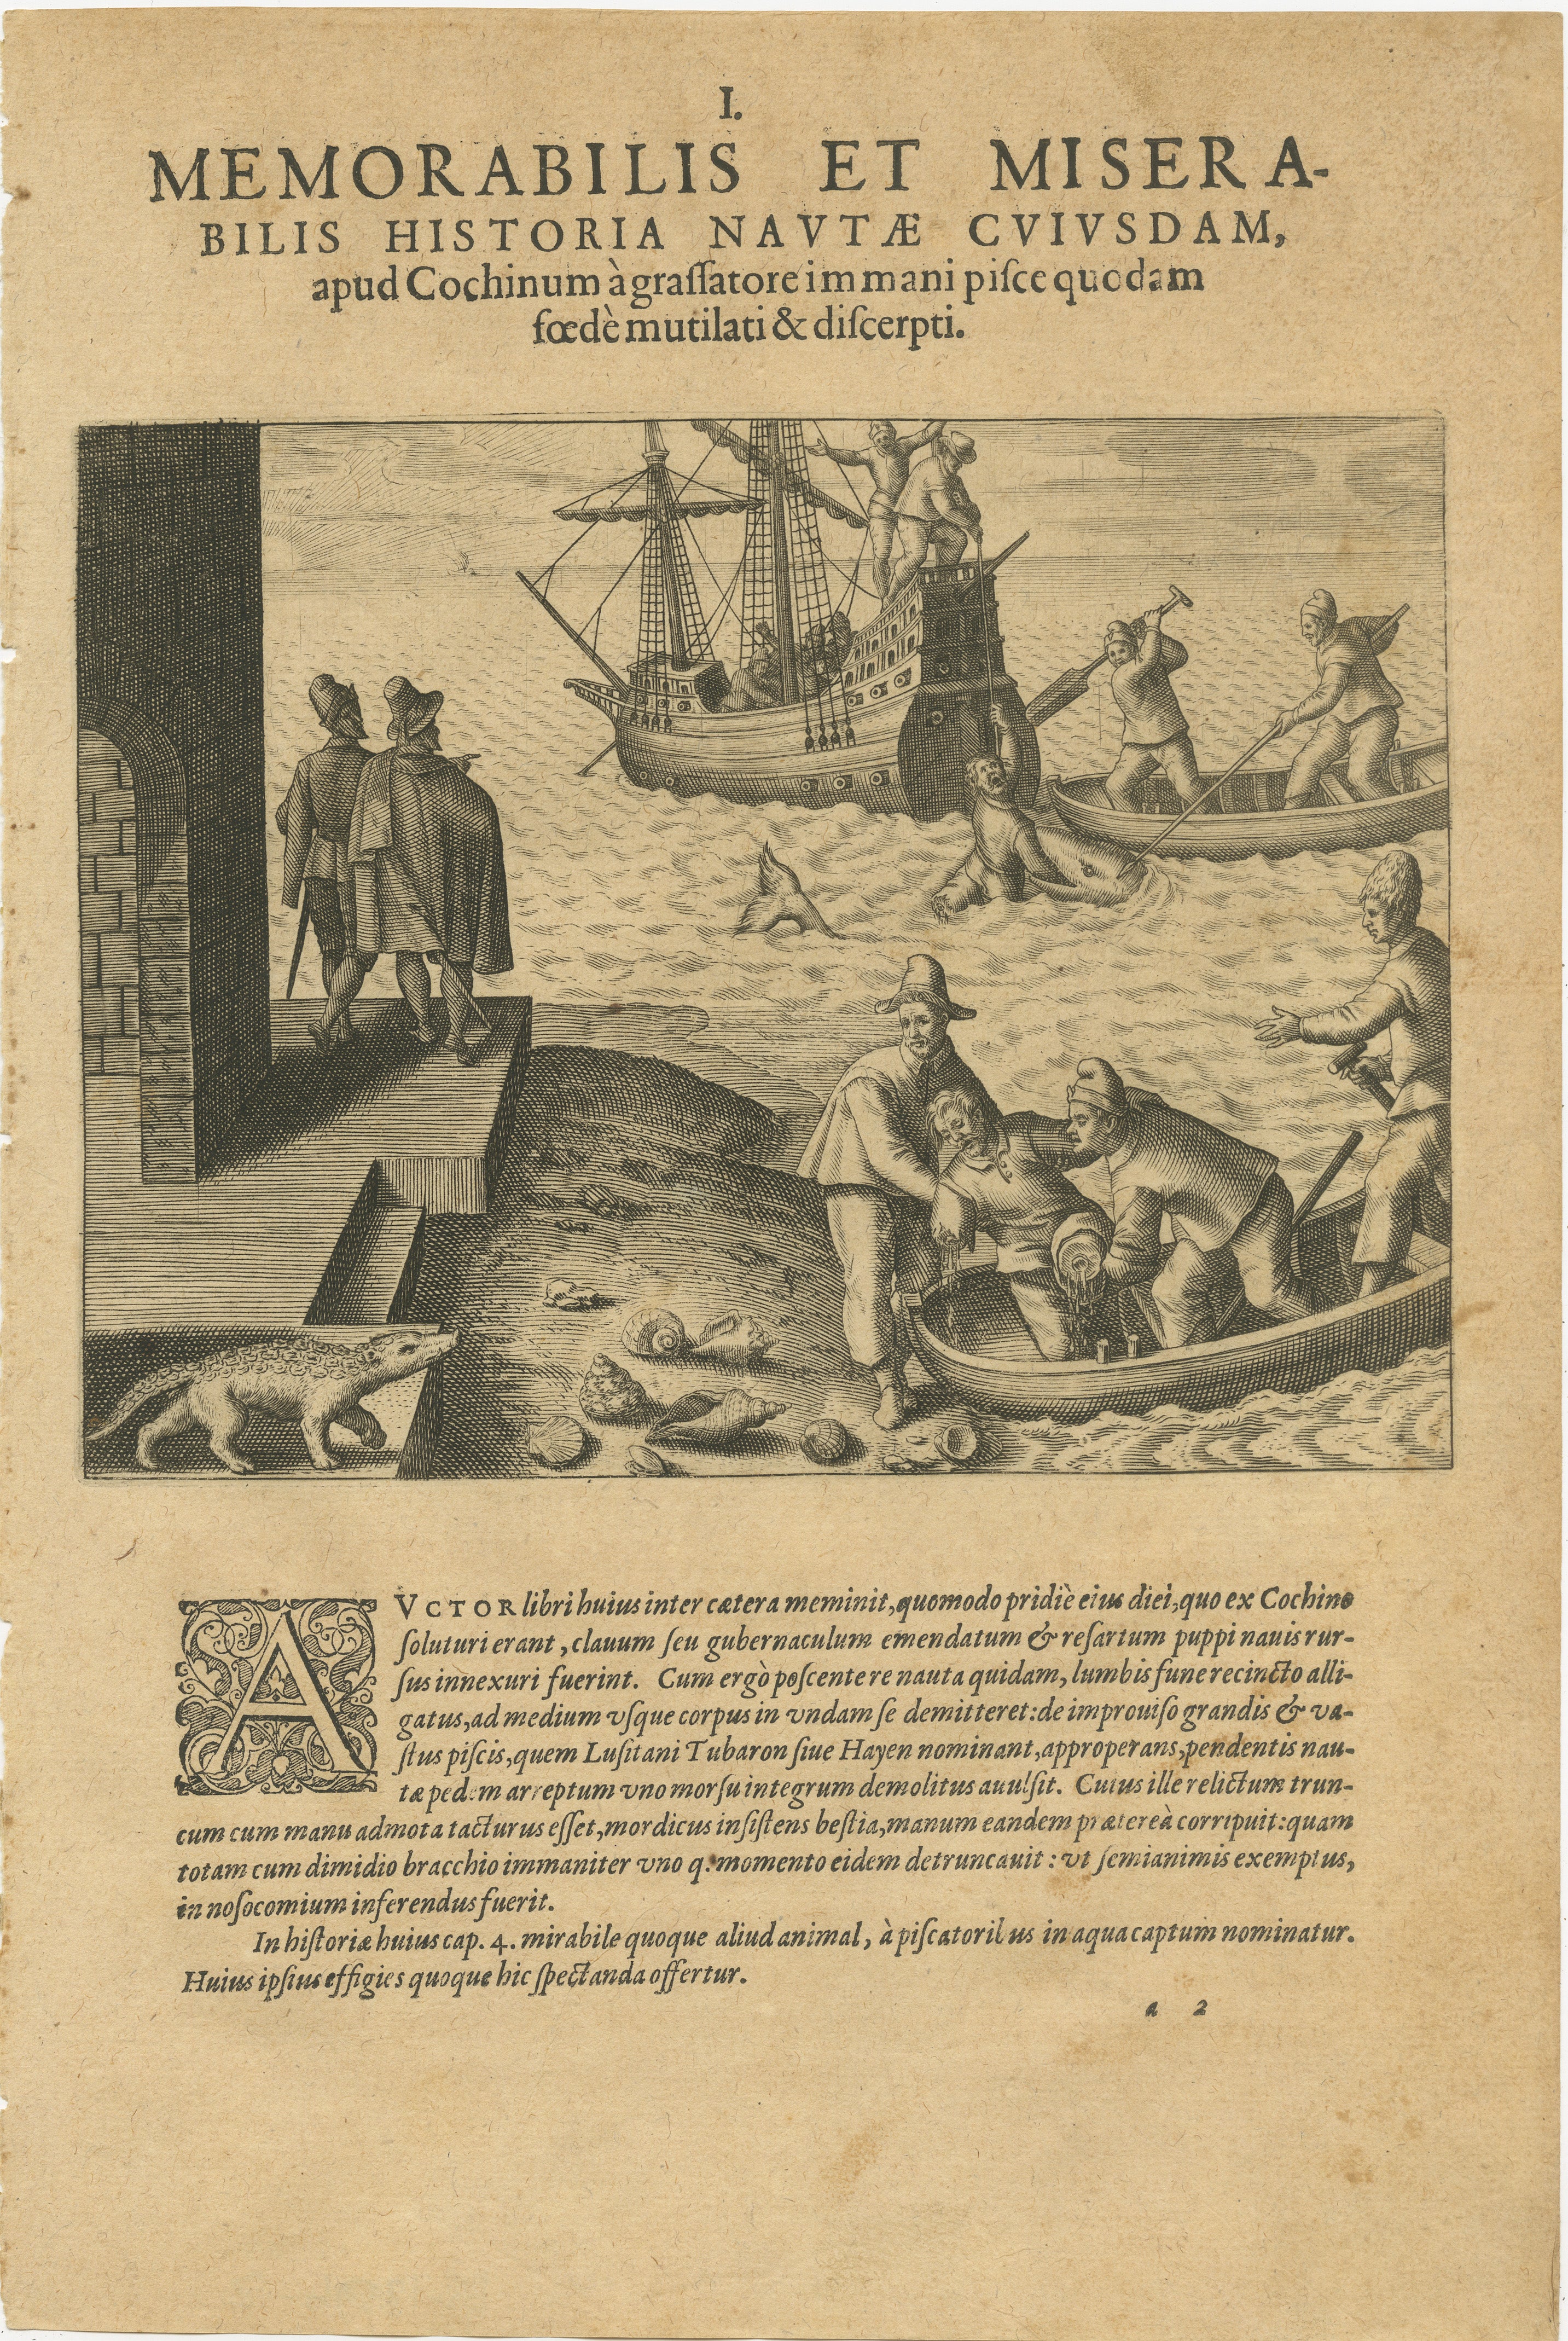 Engraving by Theodore De Bry from 'Pars Quarta Indiae Orientalis...,' 1601,  with descriptive latin text below the image.

This antique engraving of over 400 years old, shows a terrifying encounter of Dutch explorers with a leviathan at